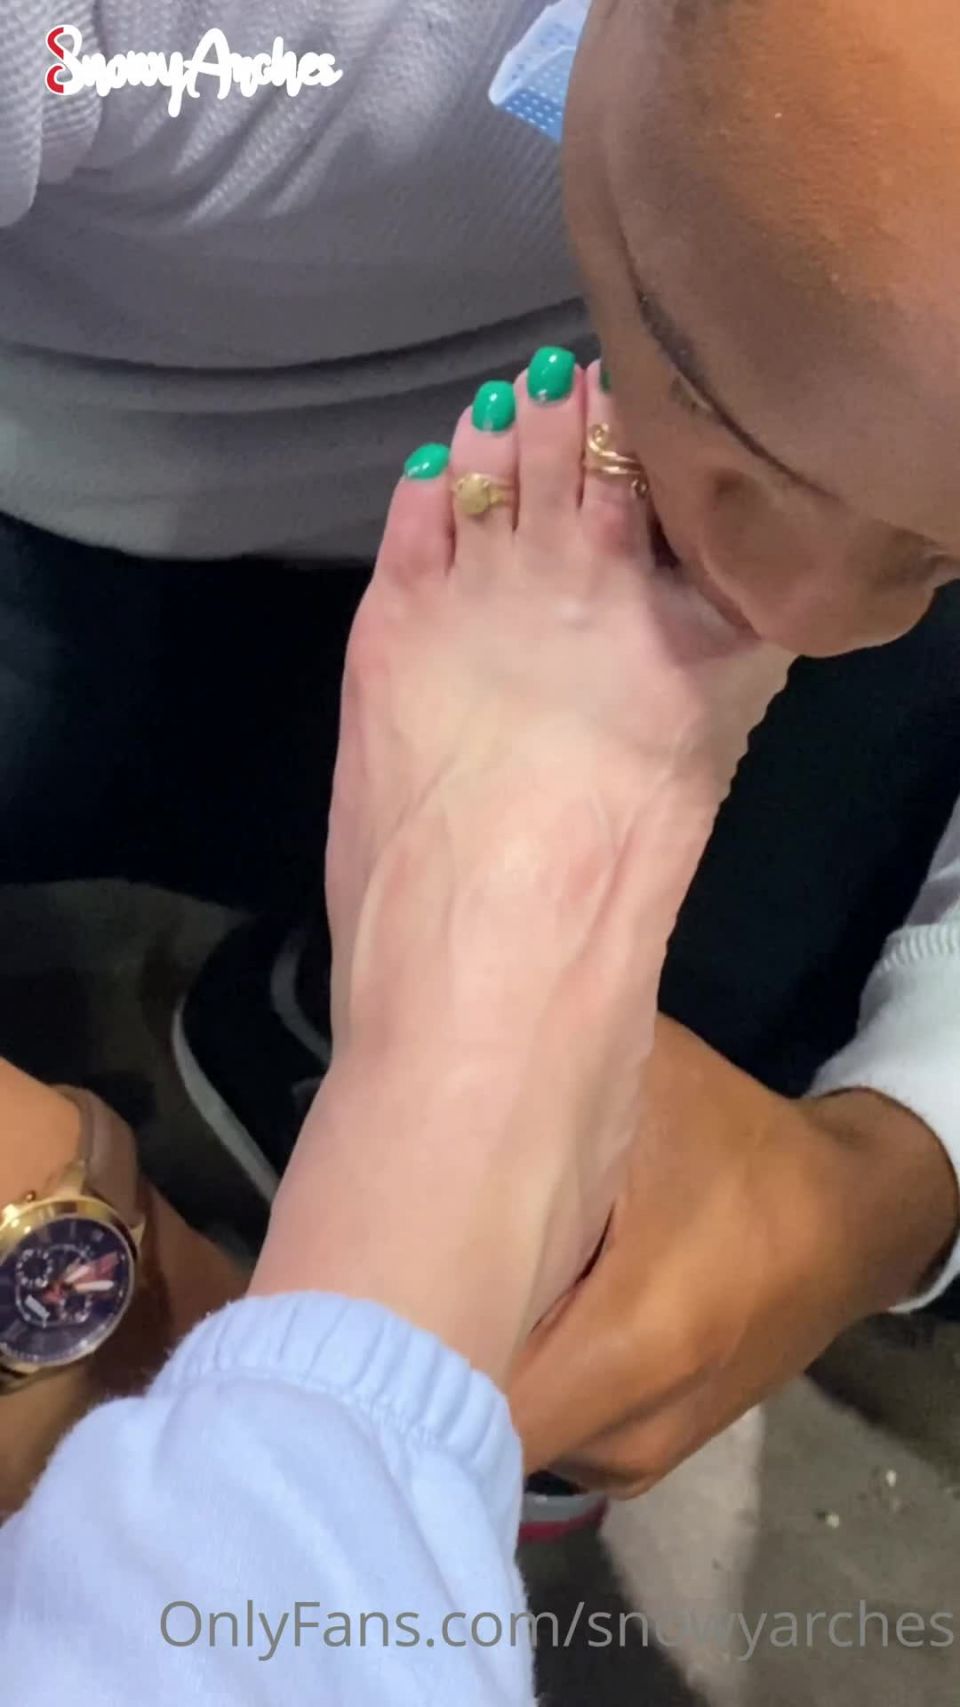 [footjob-porn.com] Onlyfans - SnowyArches_181_snowyarches-30-10-2020-1165476426-Nothing like getting my feet worshipped in public What would you do in this situation Leak